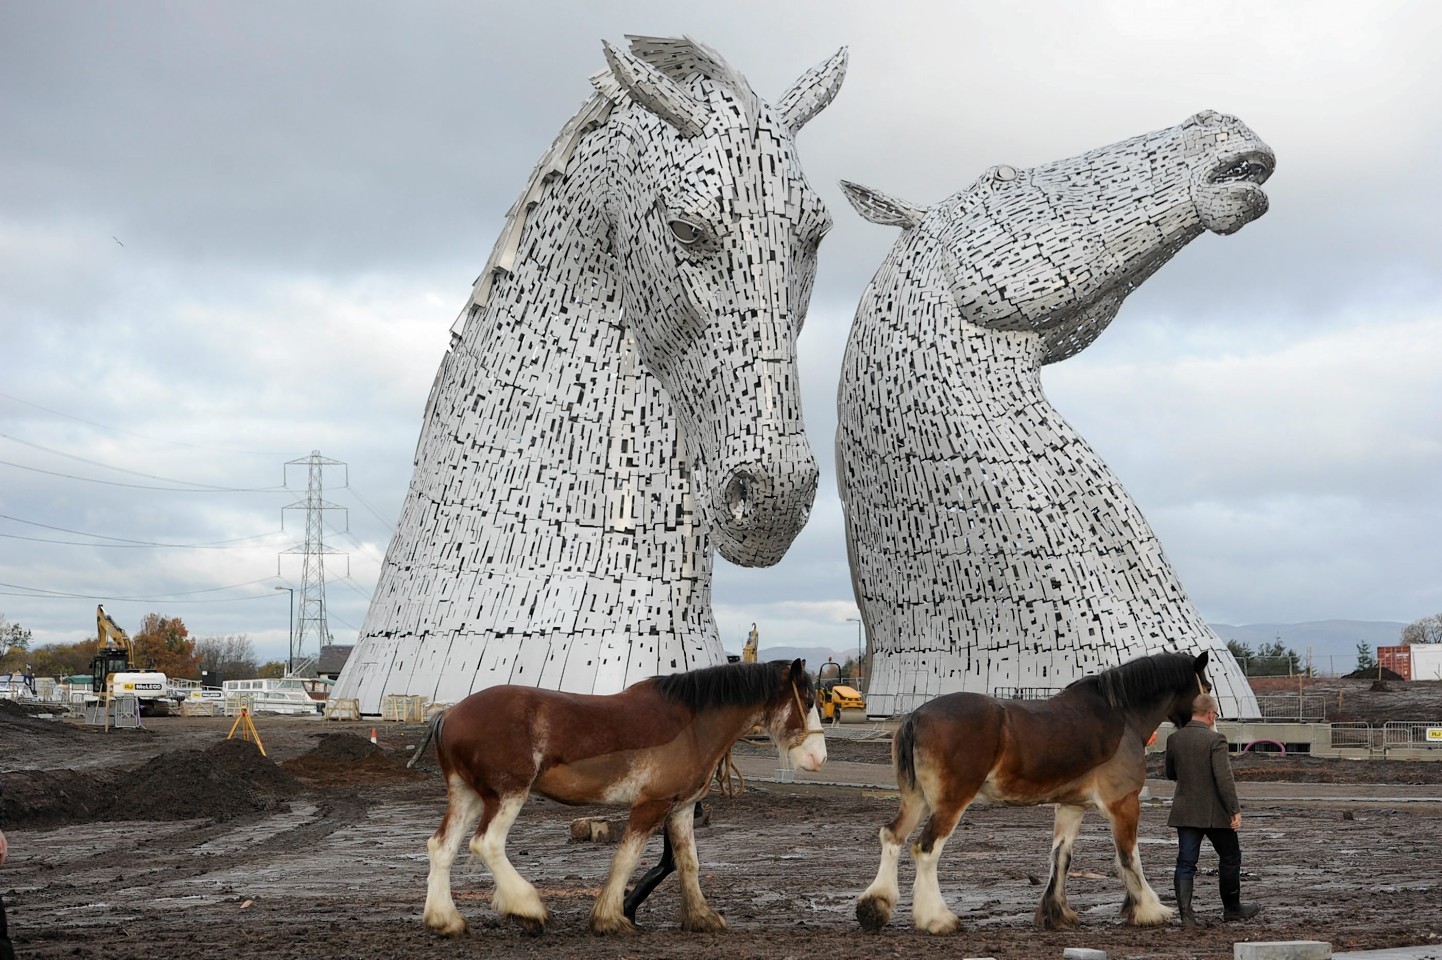 The Kelpies, a huge 100 ft £5m sculpture by the Scot artist Andy Scott at Falkirk,